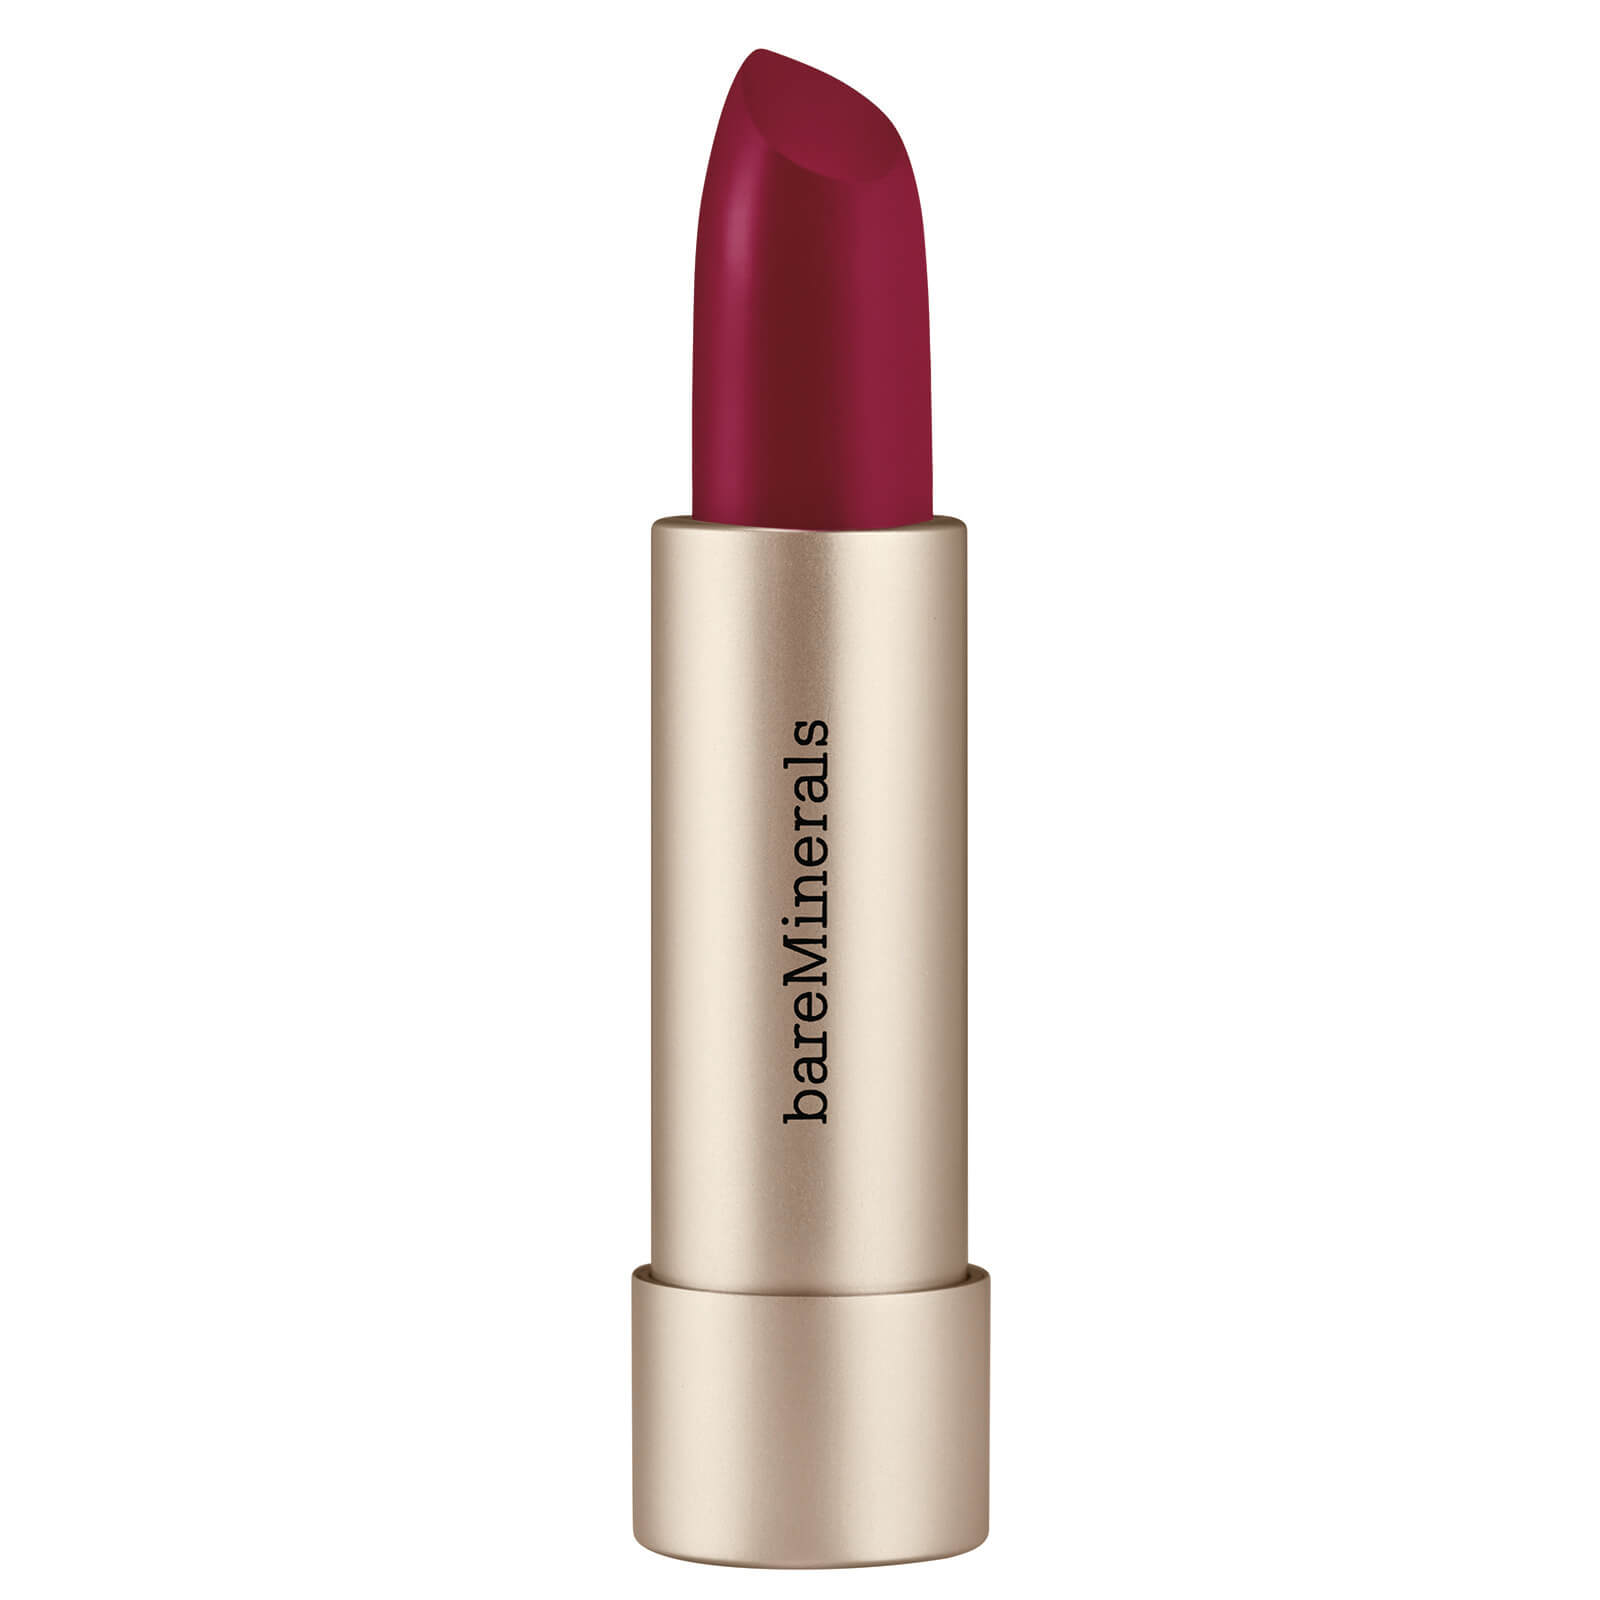 Image of bareMinerals Mineralist Hydra Smoothing Lipstick 3.6g (Various Shades) - Fortitude